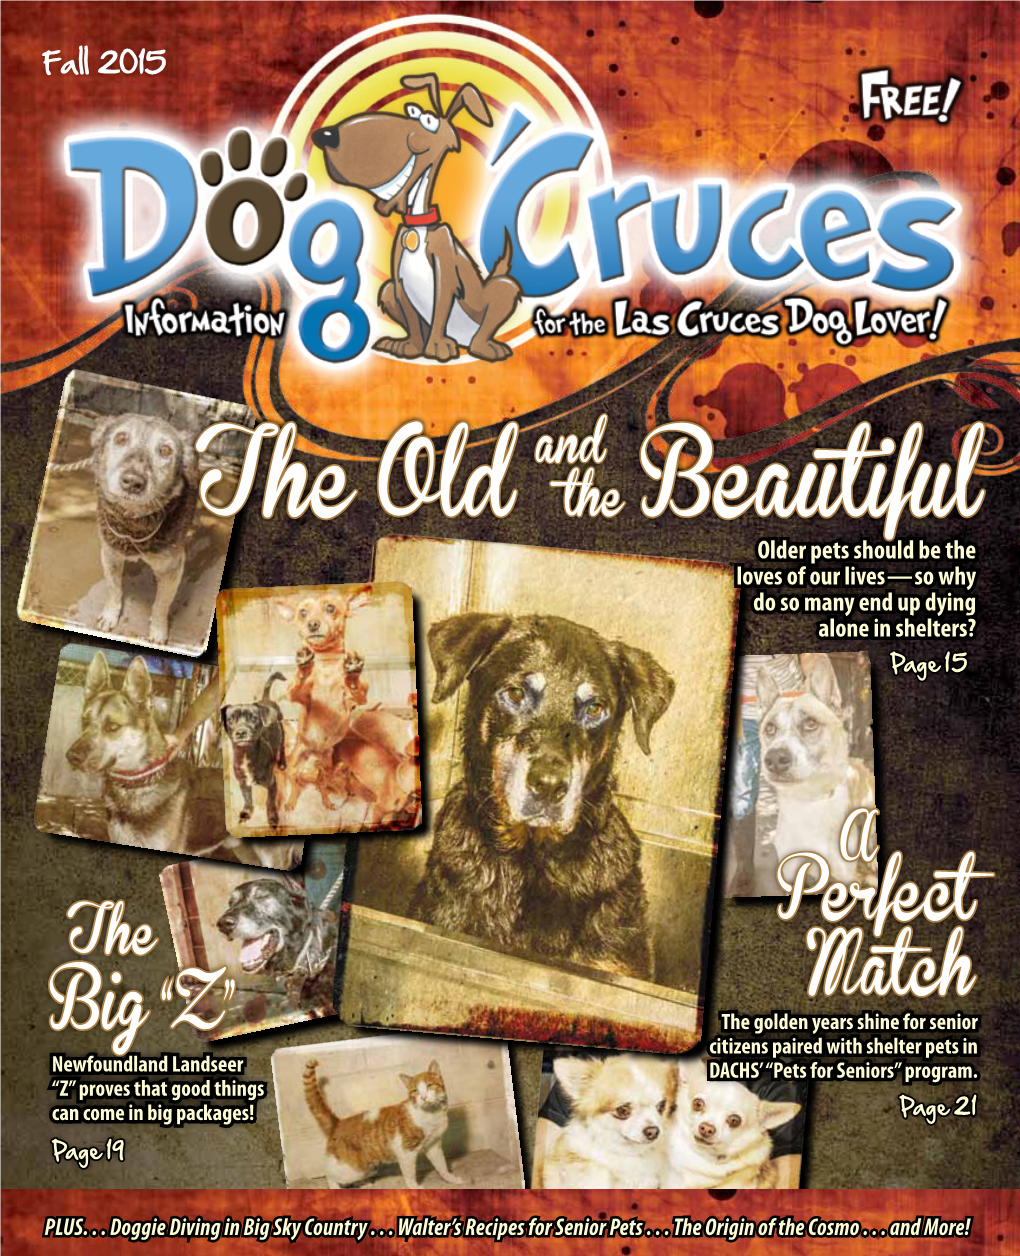 The Old Beautifulloves of Our Lives—So Why Do So Many End up Dying Alone in Shelters? Page 15